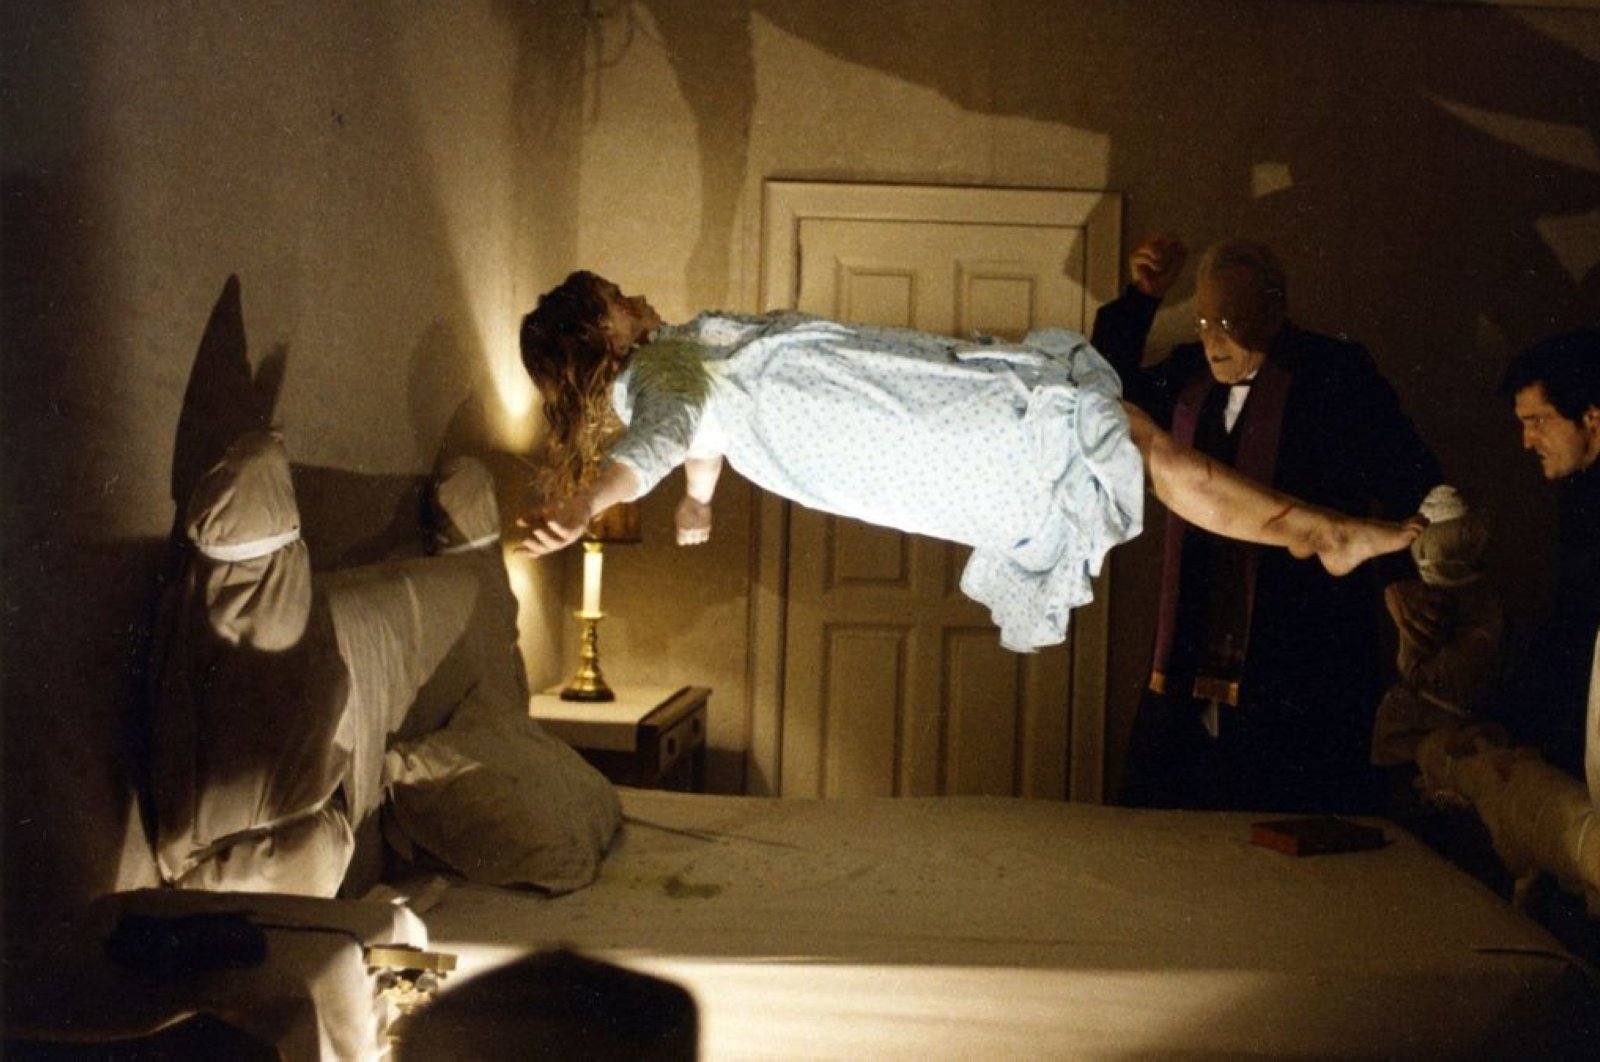 William Friedkin's “The Exorcist” was one of the cult horror movies adapted by Turkish directors.